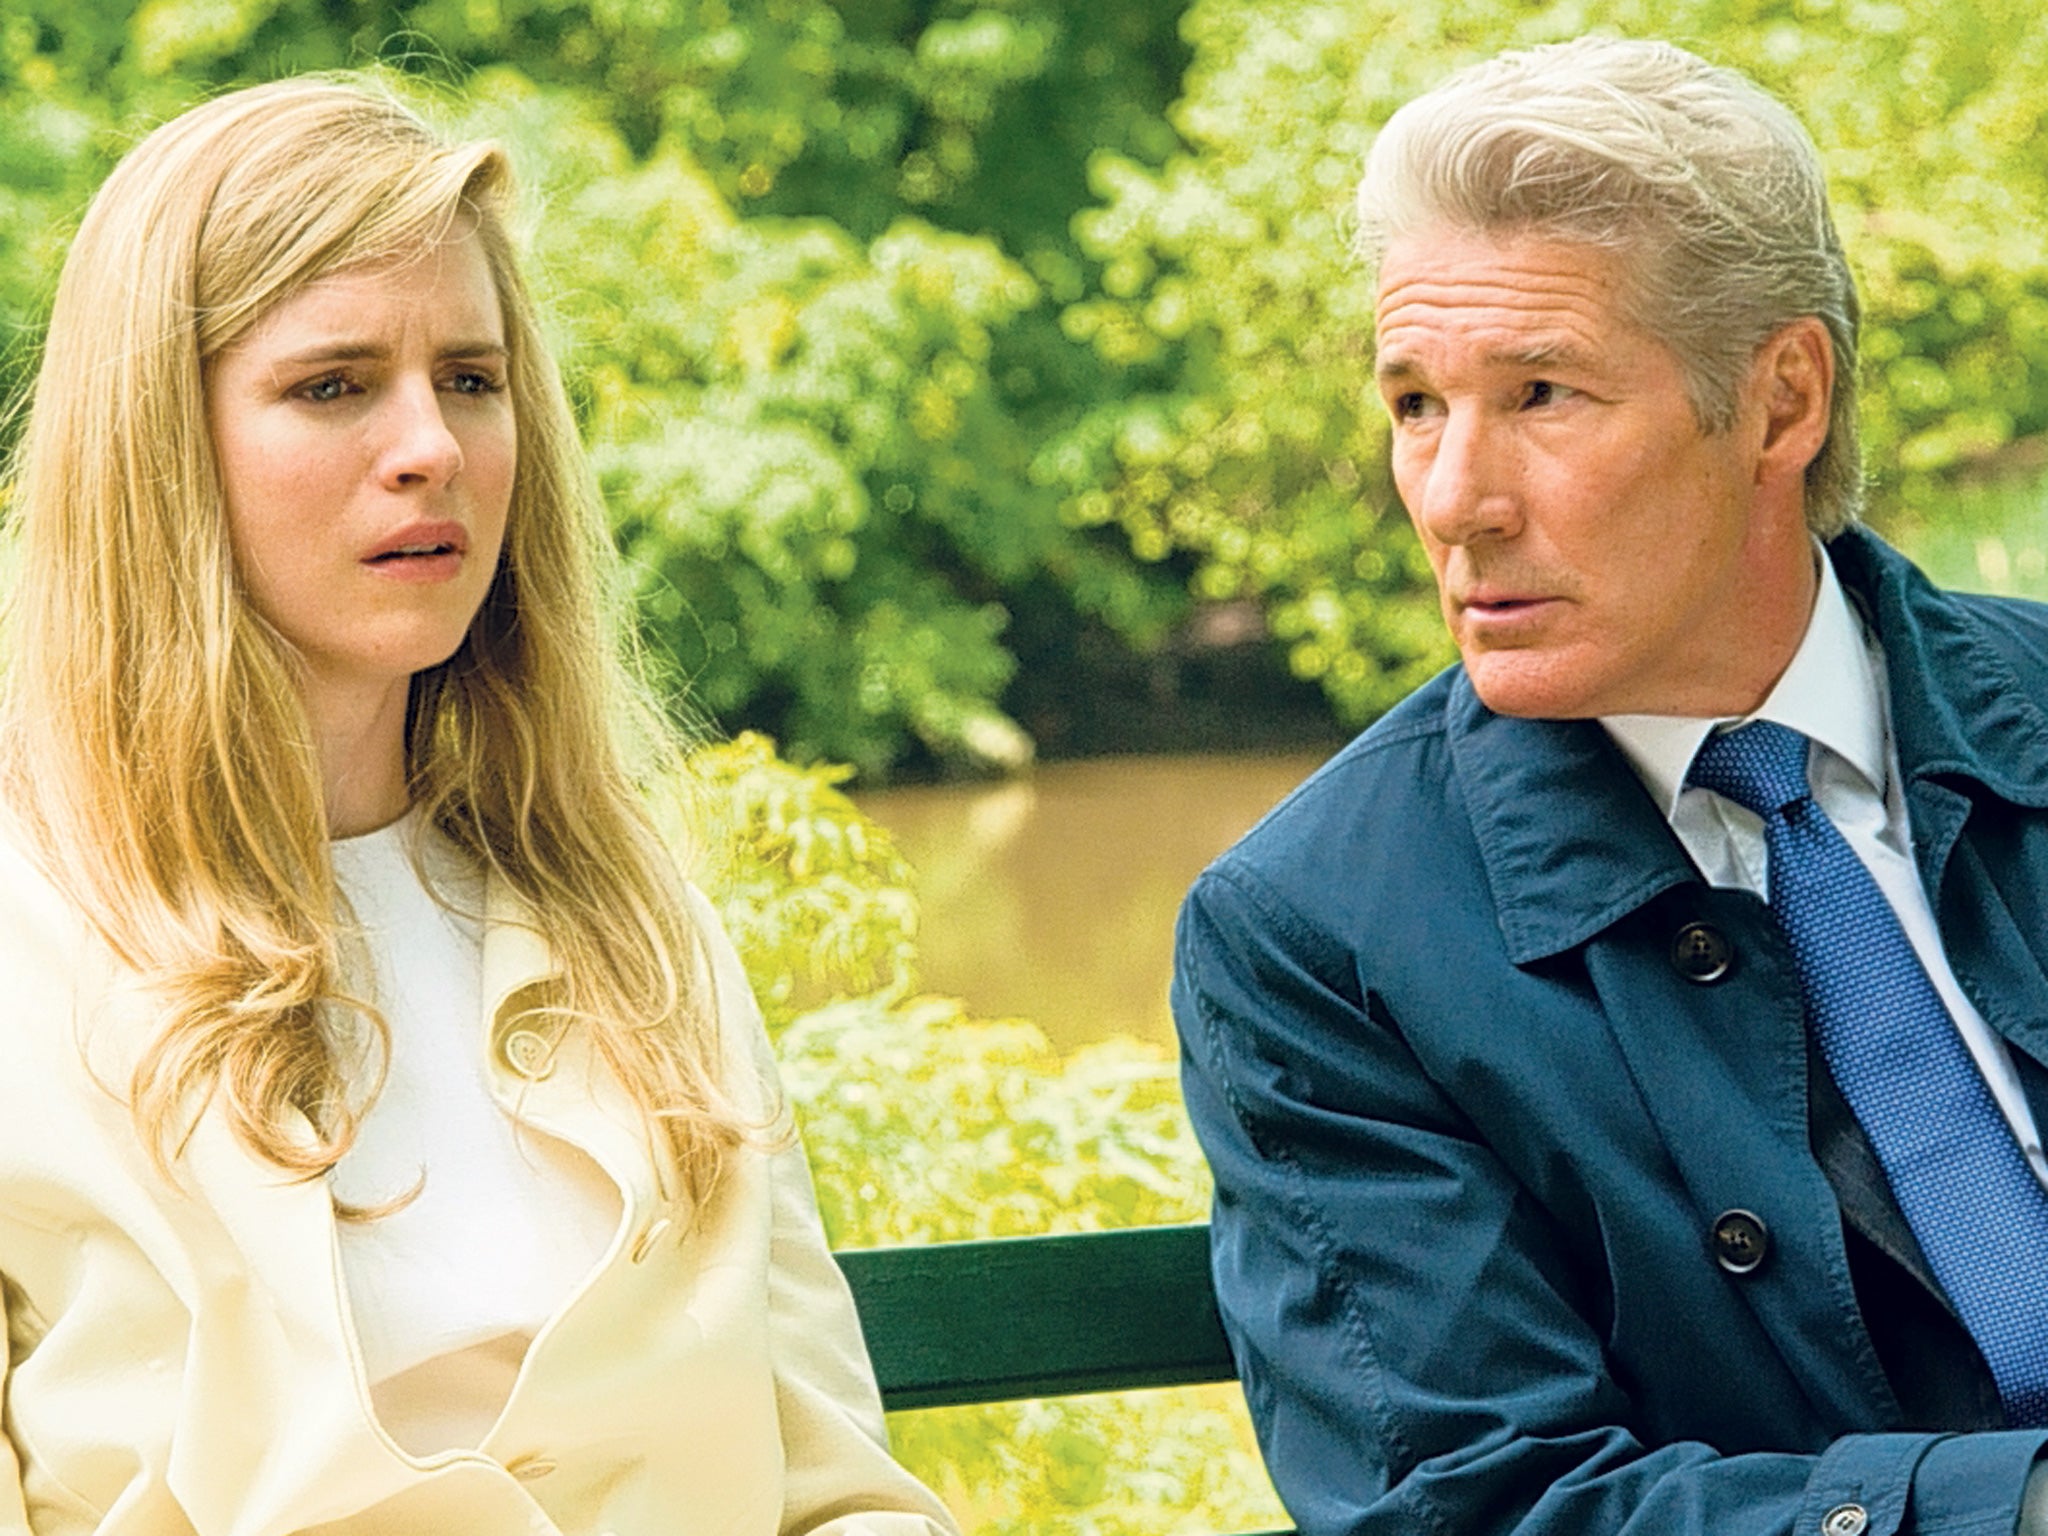 Family business: Richard Gere and Brit Marling play father and daughter in the drama ‘'Arbitrage'